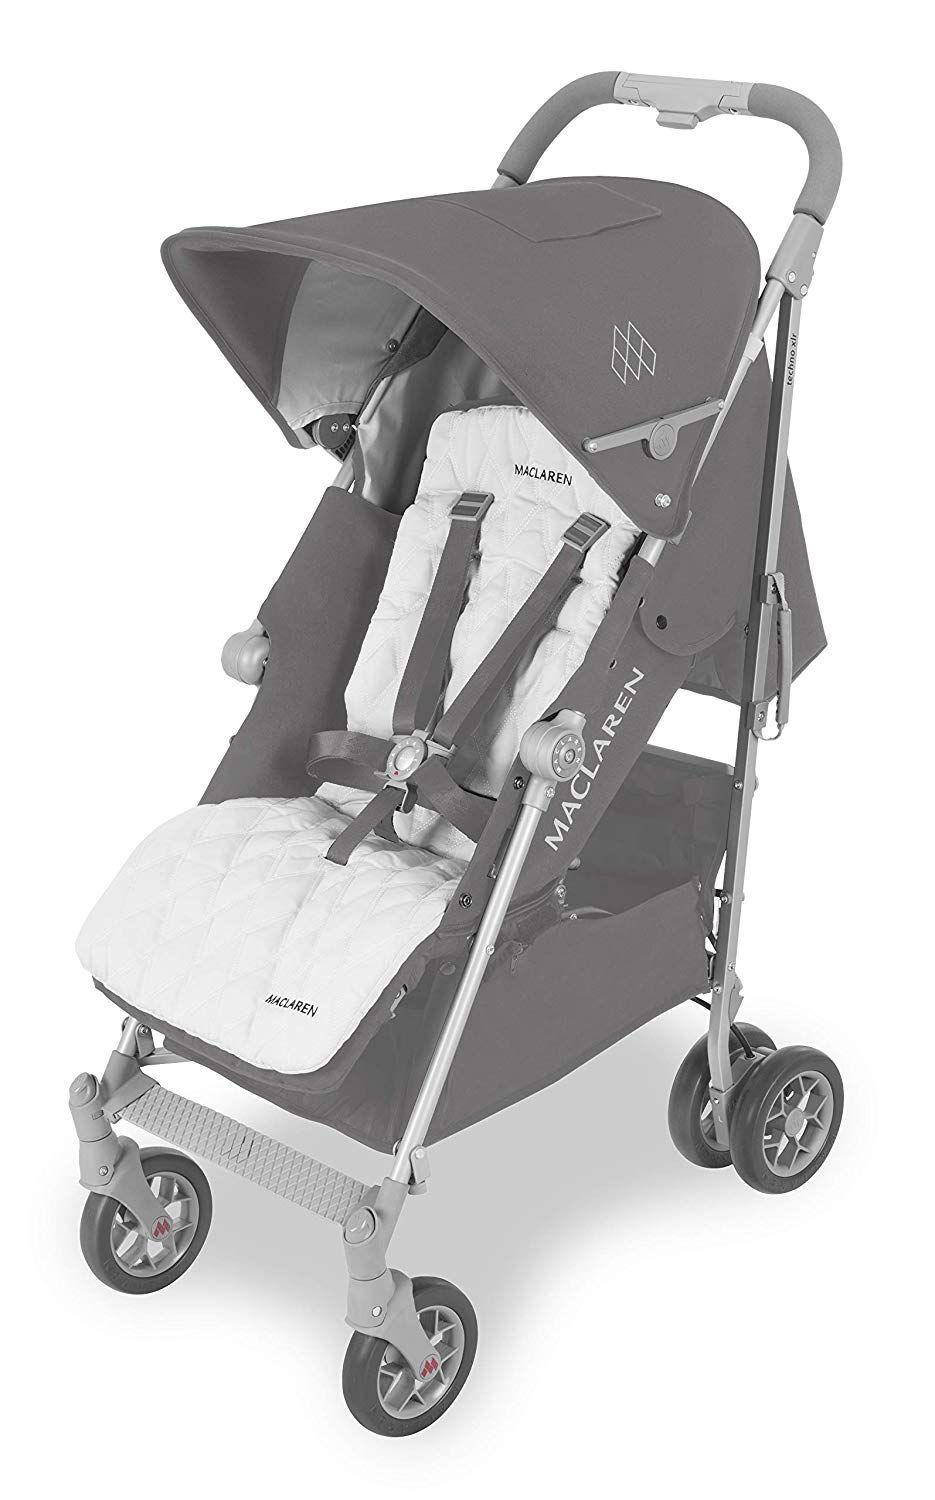 Maclaren Techno XLR arc Buggy - Largest umbrella fold buggy for newborns up to 29 kg. Extendable canopy, extra padded flat seat with adjustable positions, 4-wheel suspension